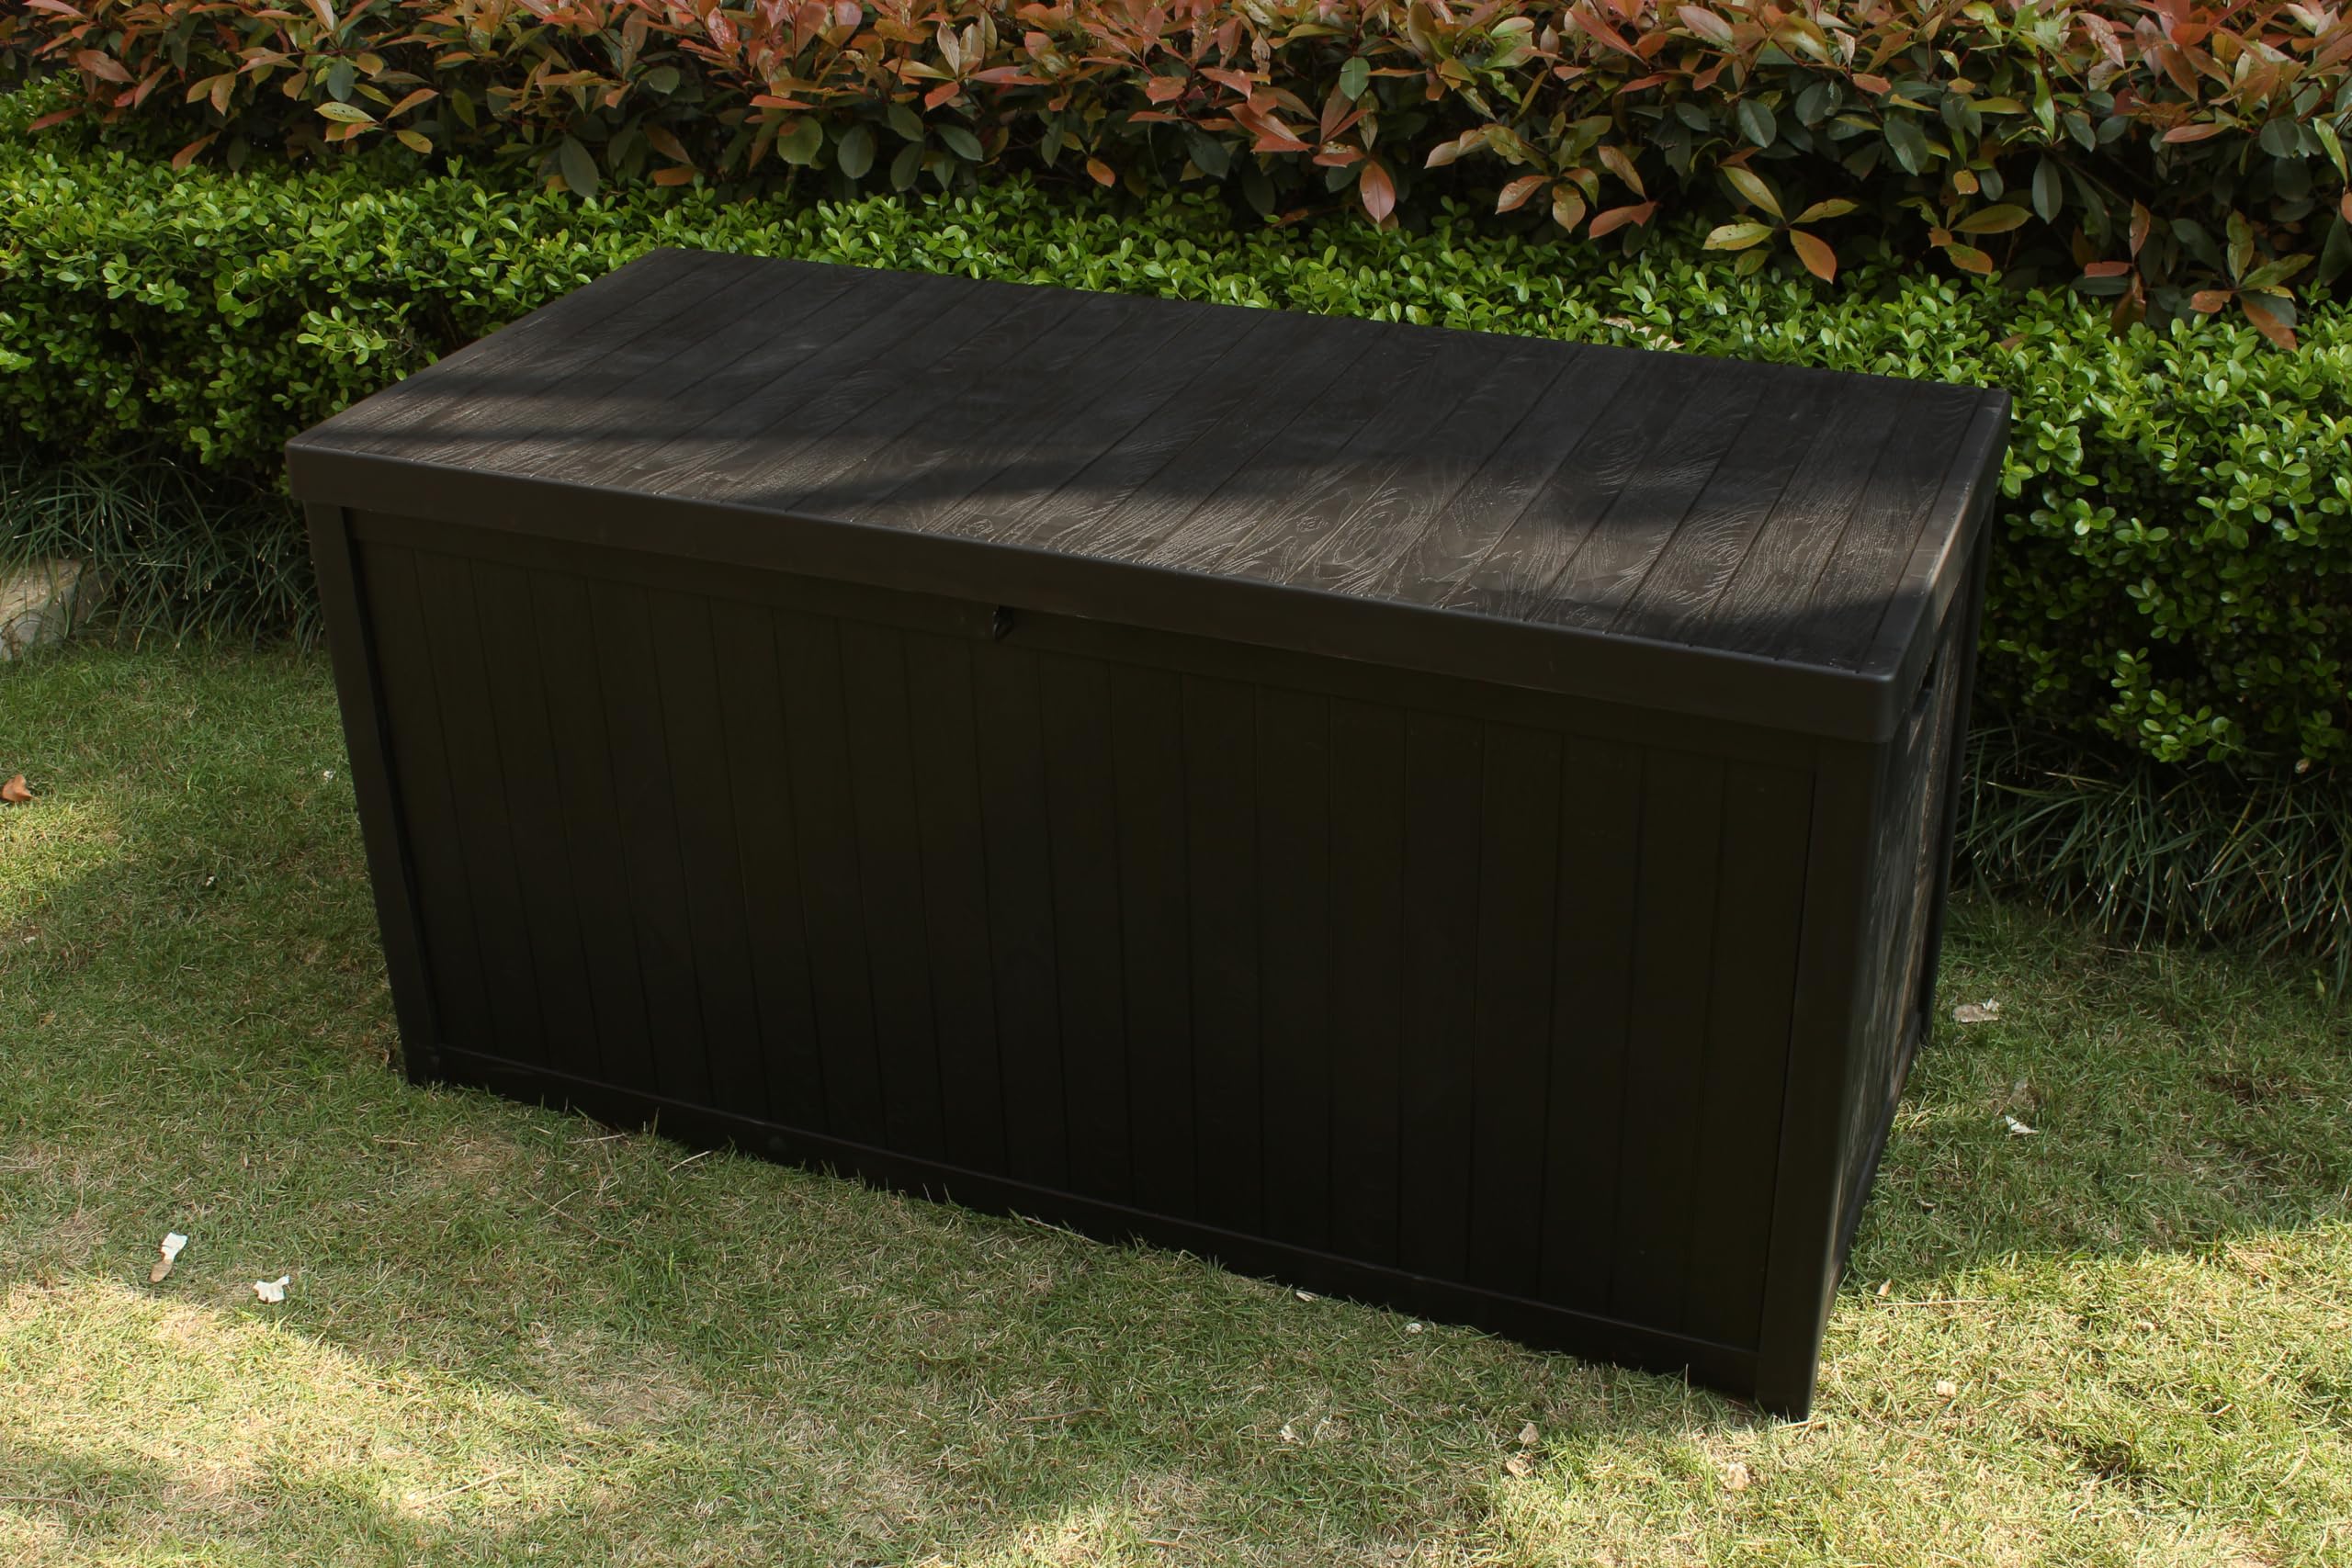 EHHLY Commercial Grade Deck Box, 113 Gallon Outdoor Storage Box Large, Black